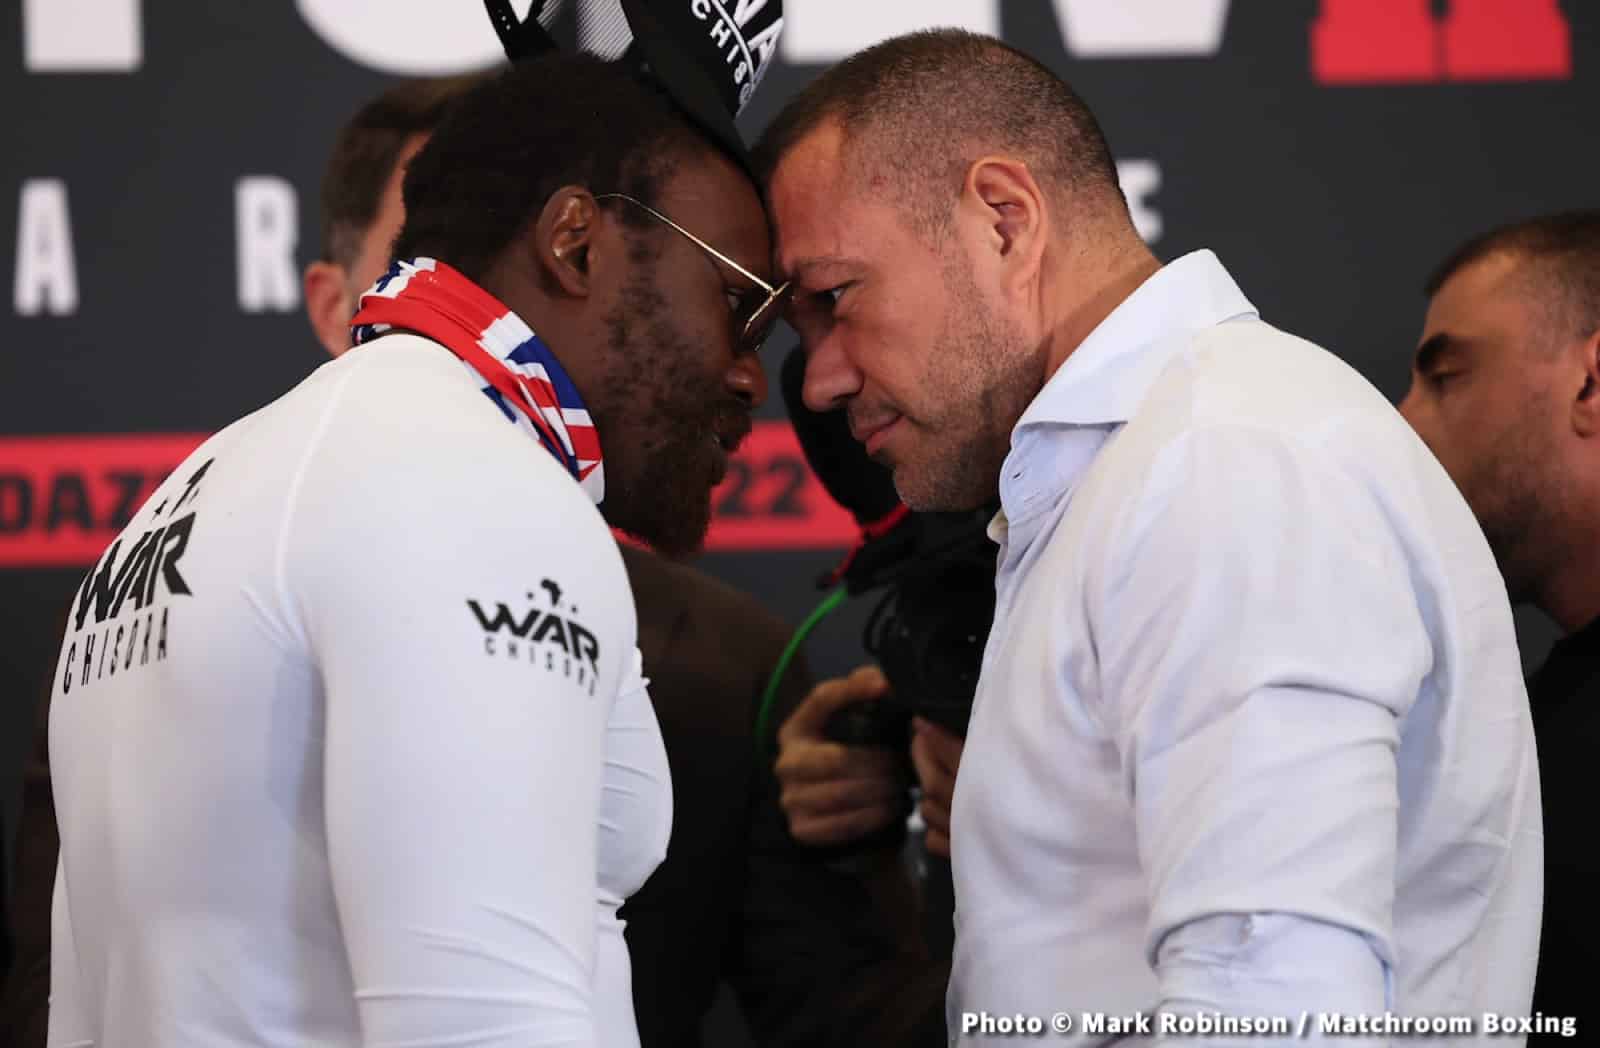 Image: Eddie Hearn says Chisora will get a "big fight" if he defeats Pulev on Saturday